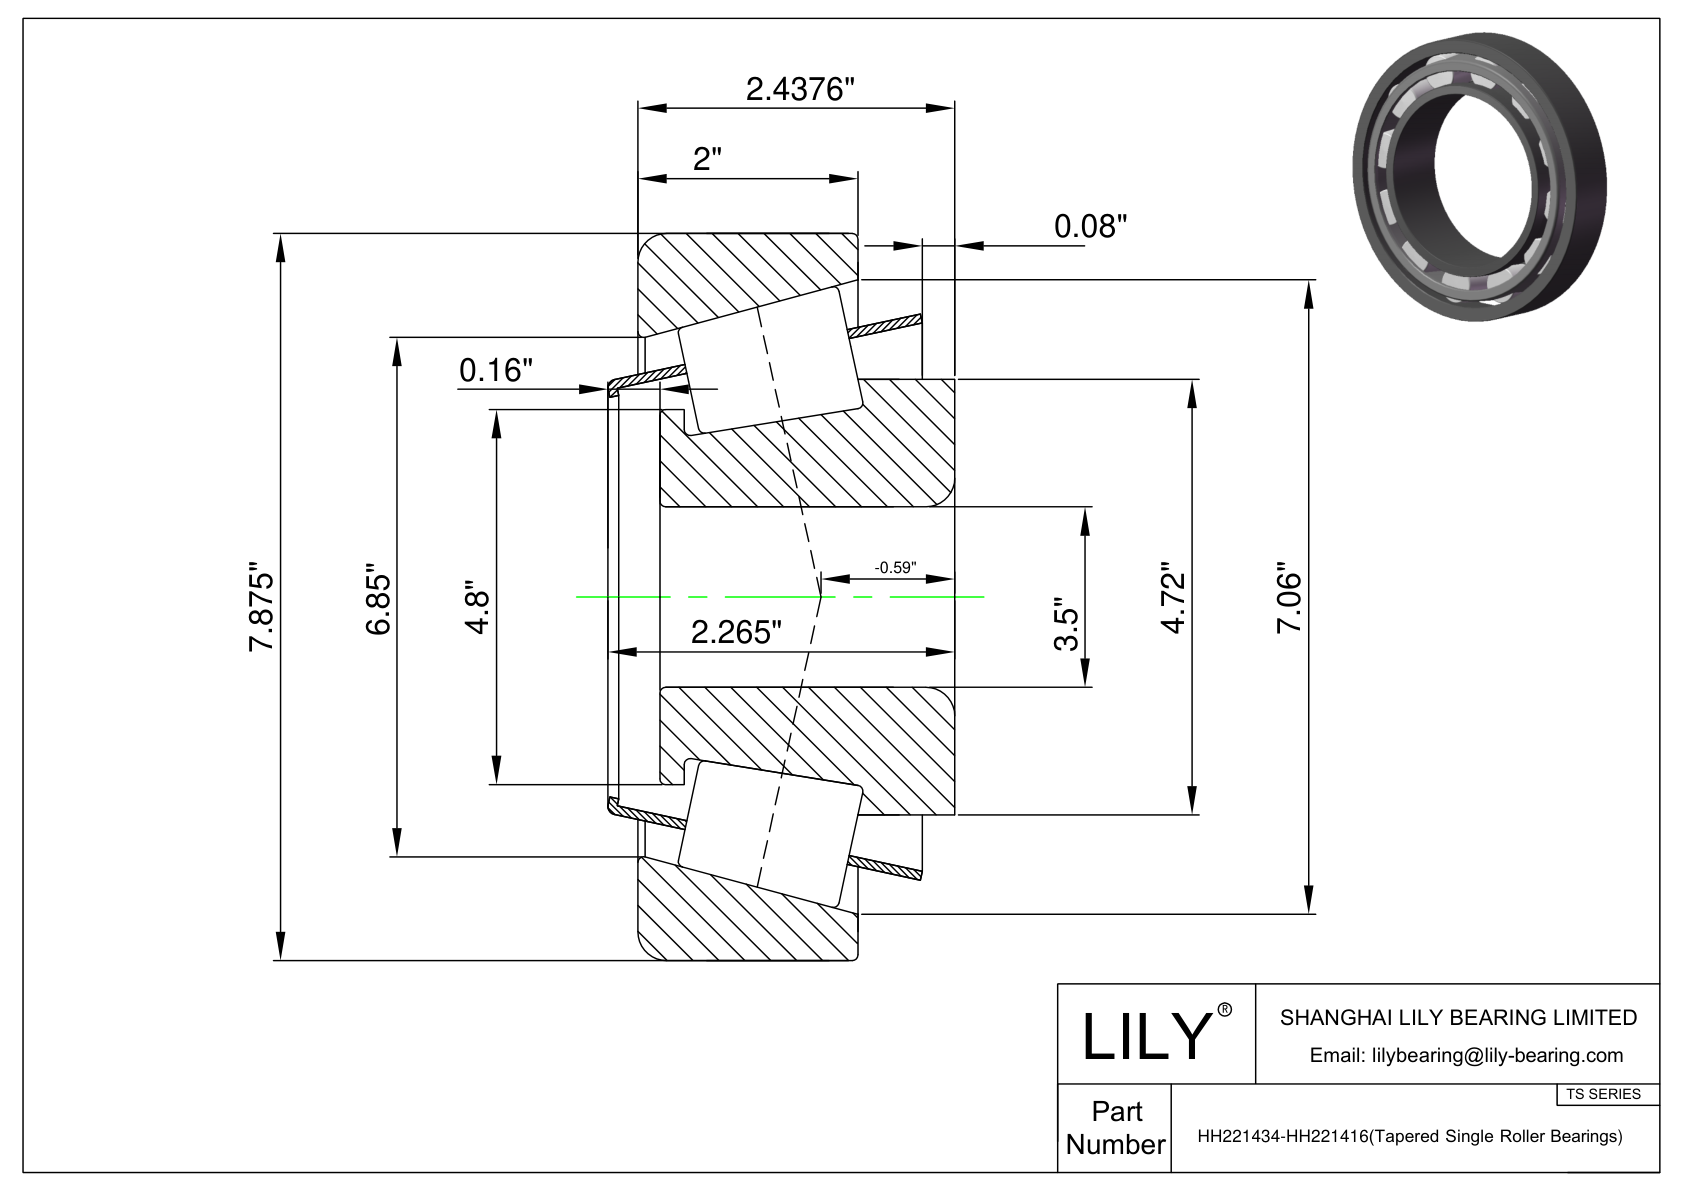 HH221434-HH221416 TS (Tapered Single Roller Bearings) (Imperial) cad drawing